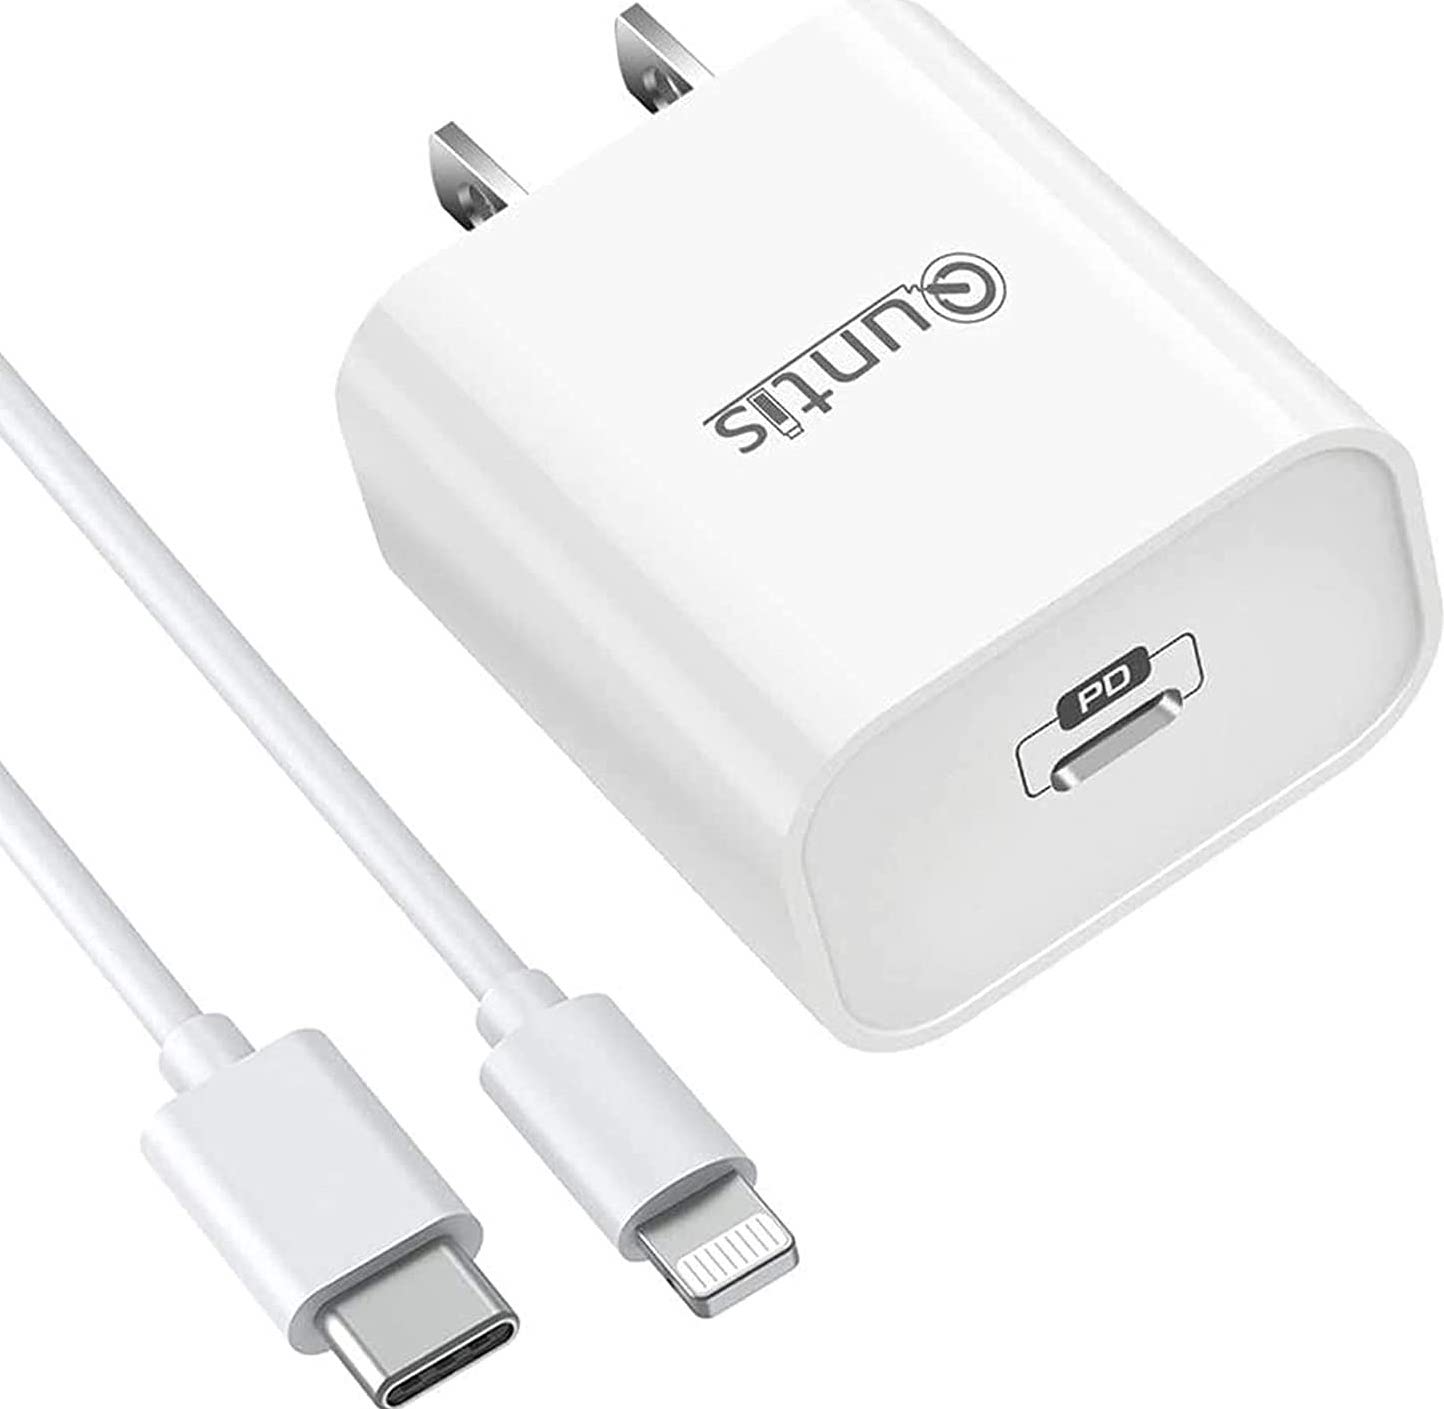 Quntis Iphone13 Wall Adapter Render Cropped